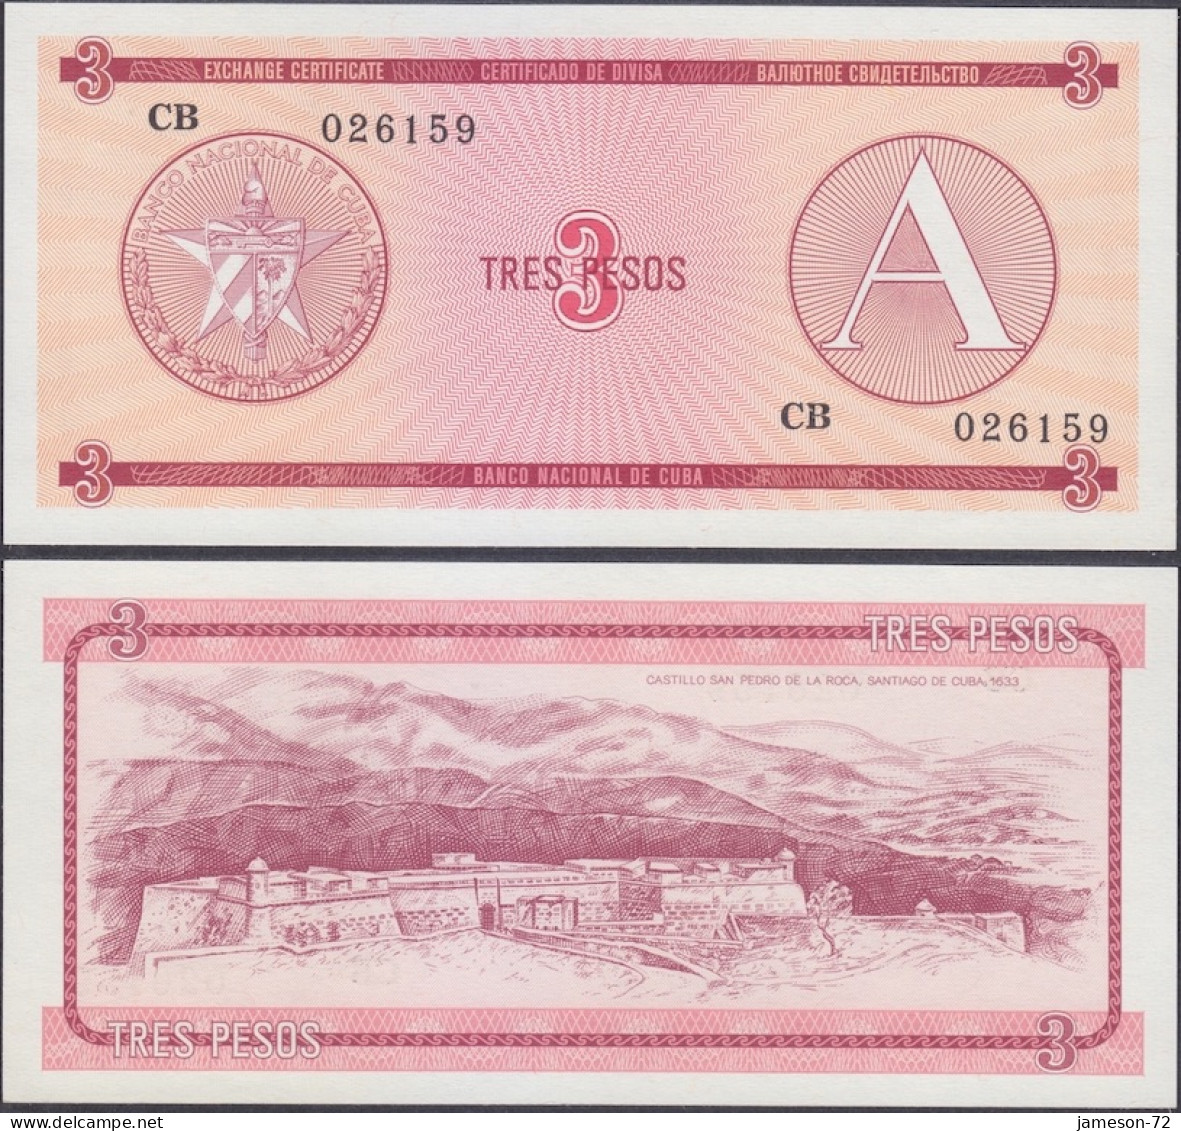 CUBA - 3 Pesos ND (1985) Serie A P# FX2 Foreign Exchange Certificate America Banknote - Edelweiss Coins - Cuba